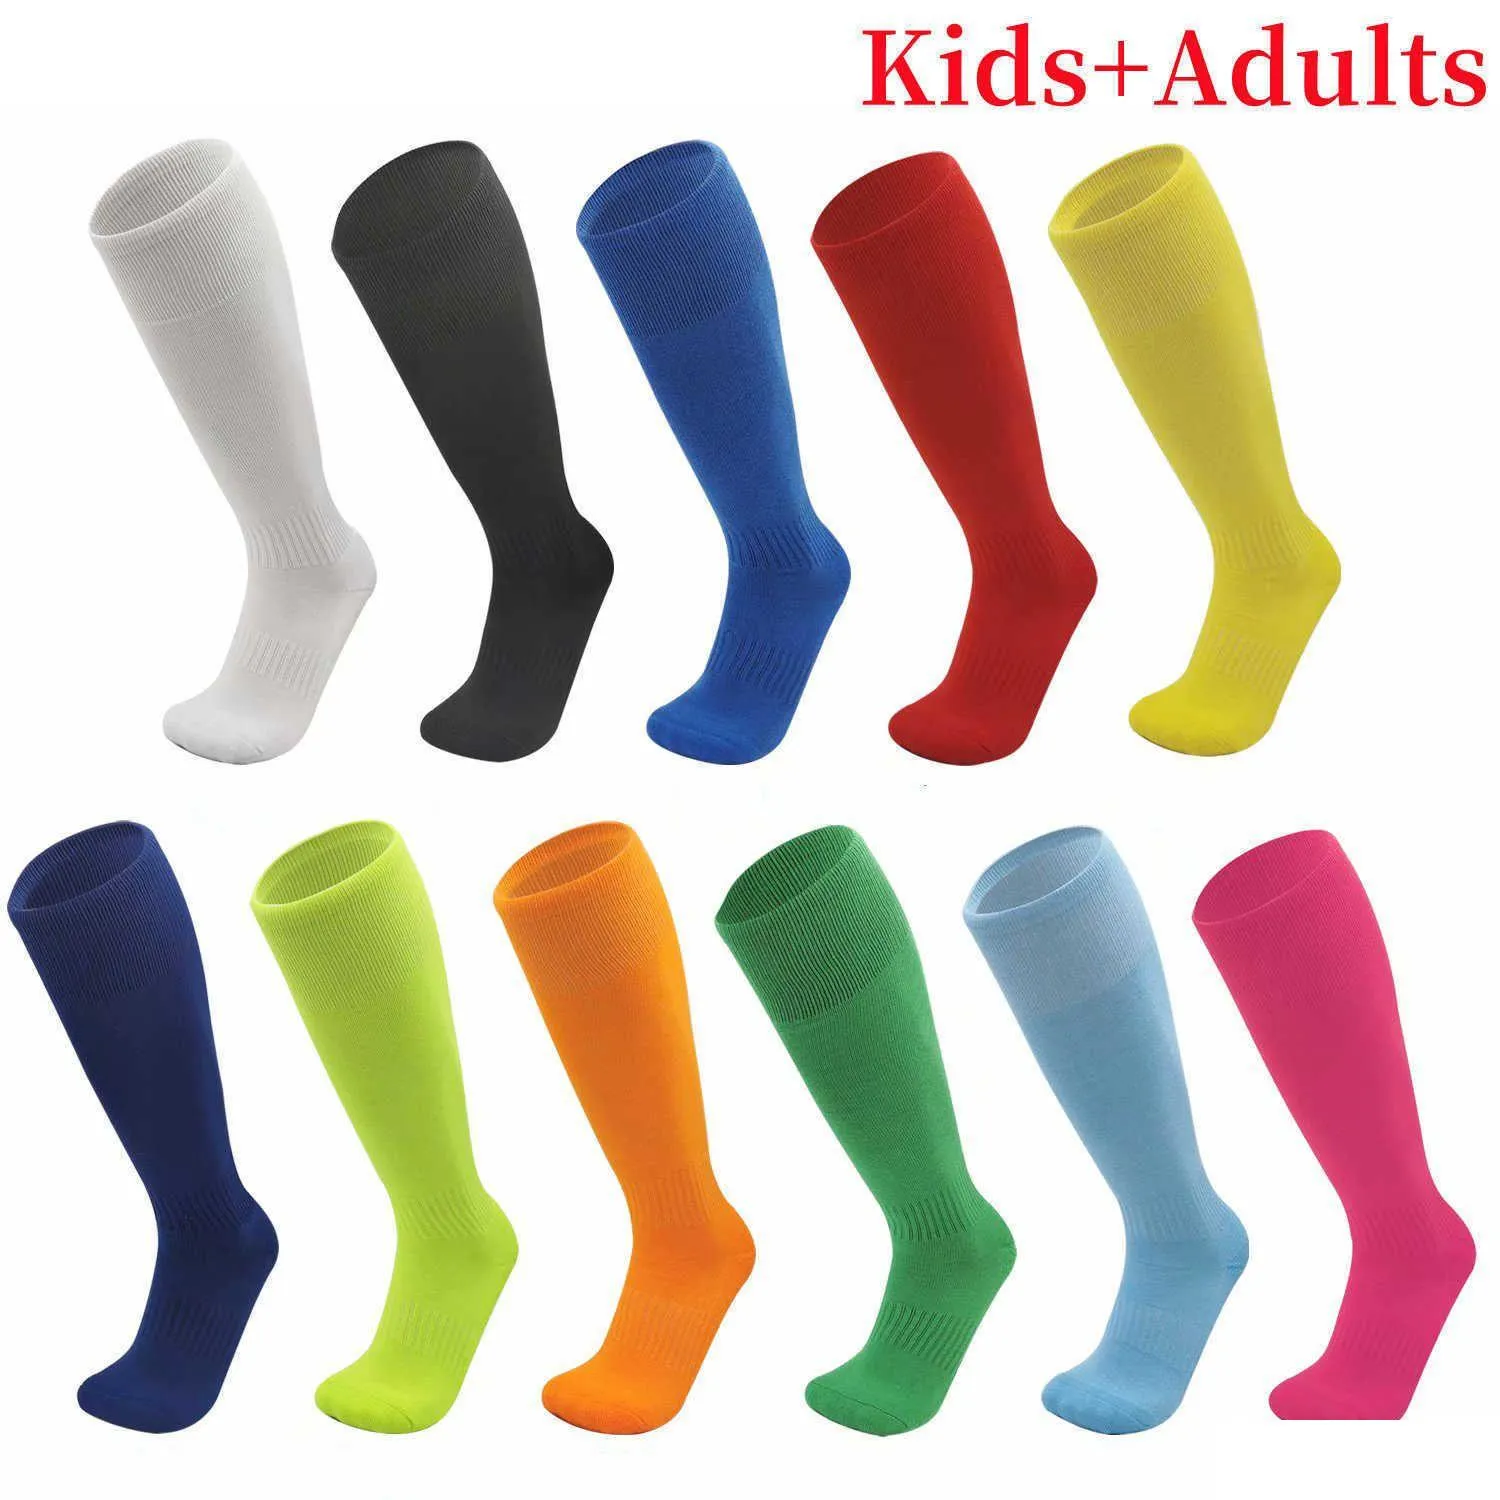 Sports Socks Football Adend Outdoor Rugby Strumpor Over Kne High Volleyball Baseball Hockey Kids Adts Long L221026 Drop Delivery DHMNQ